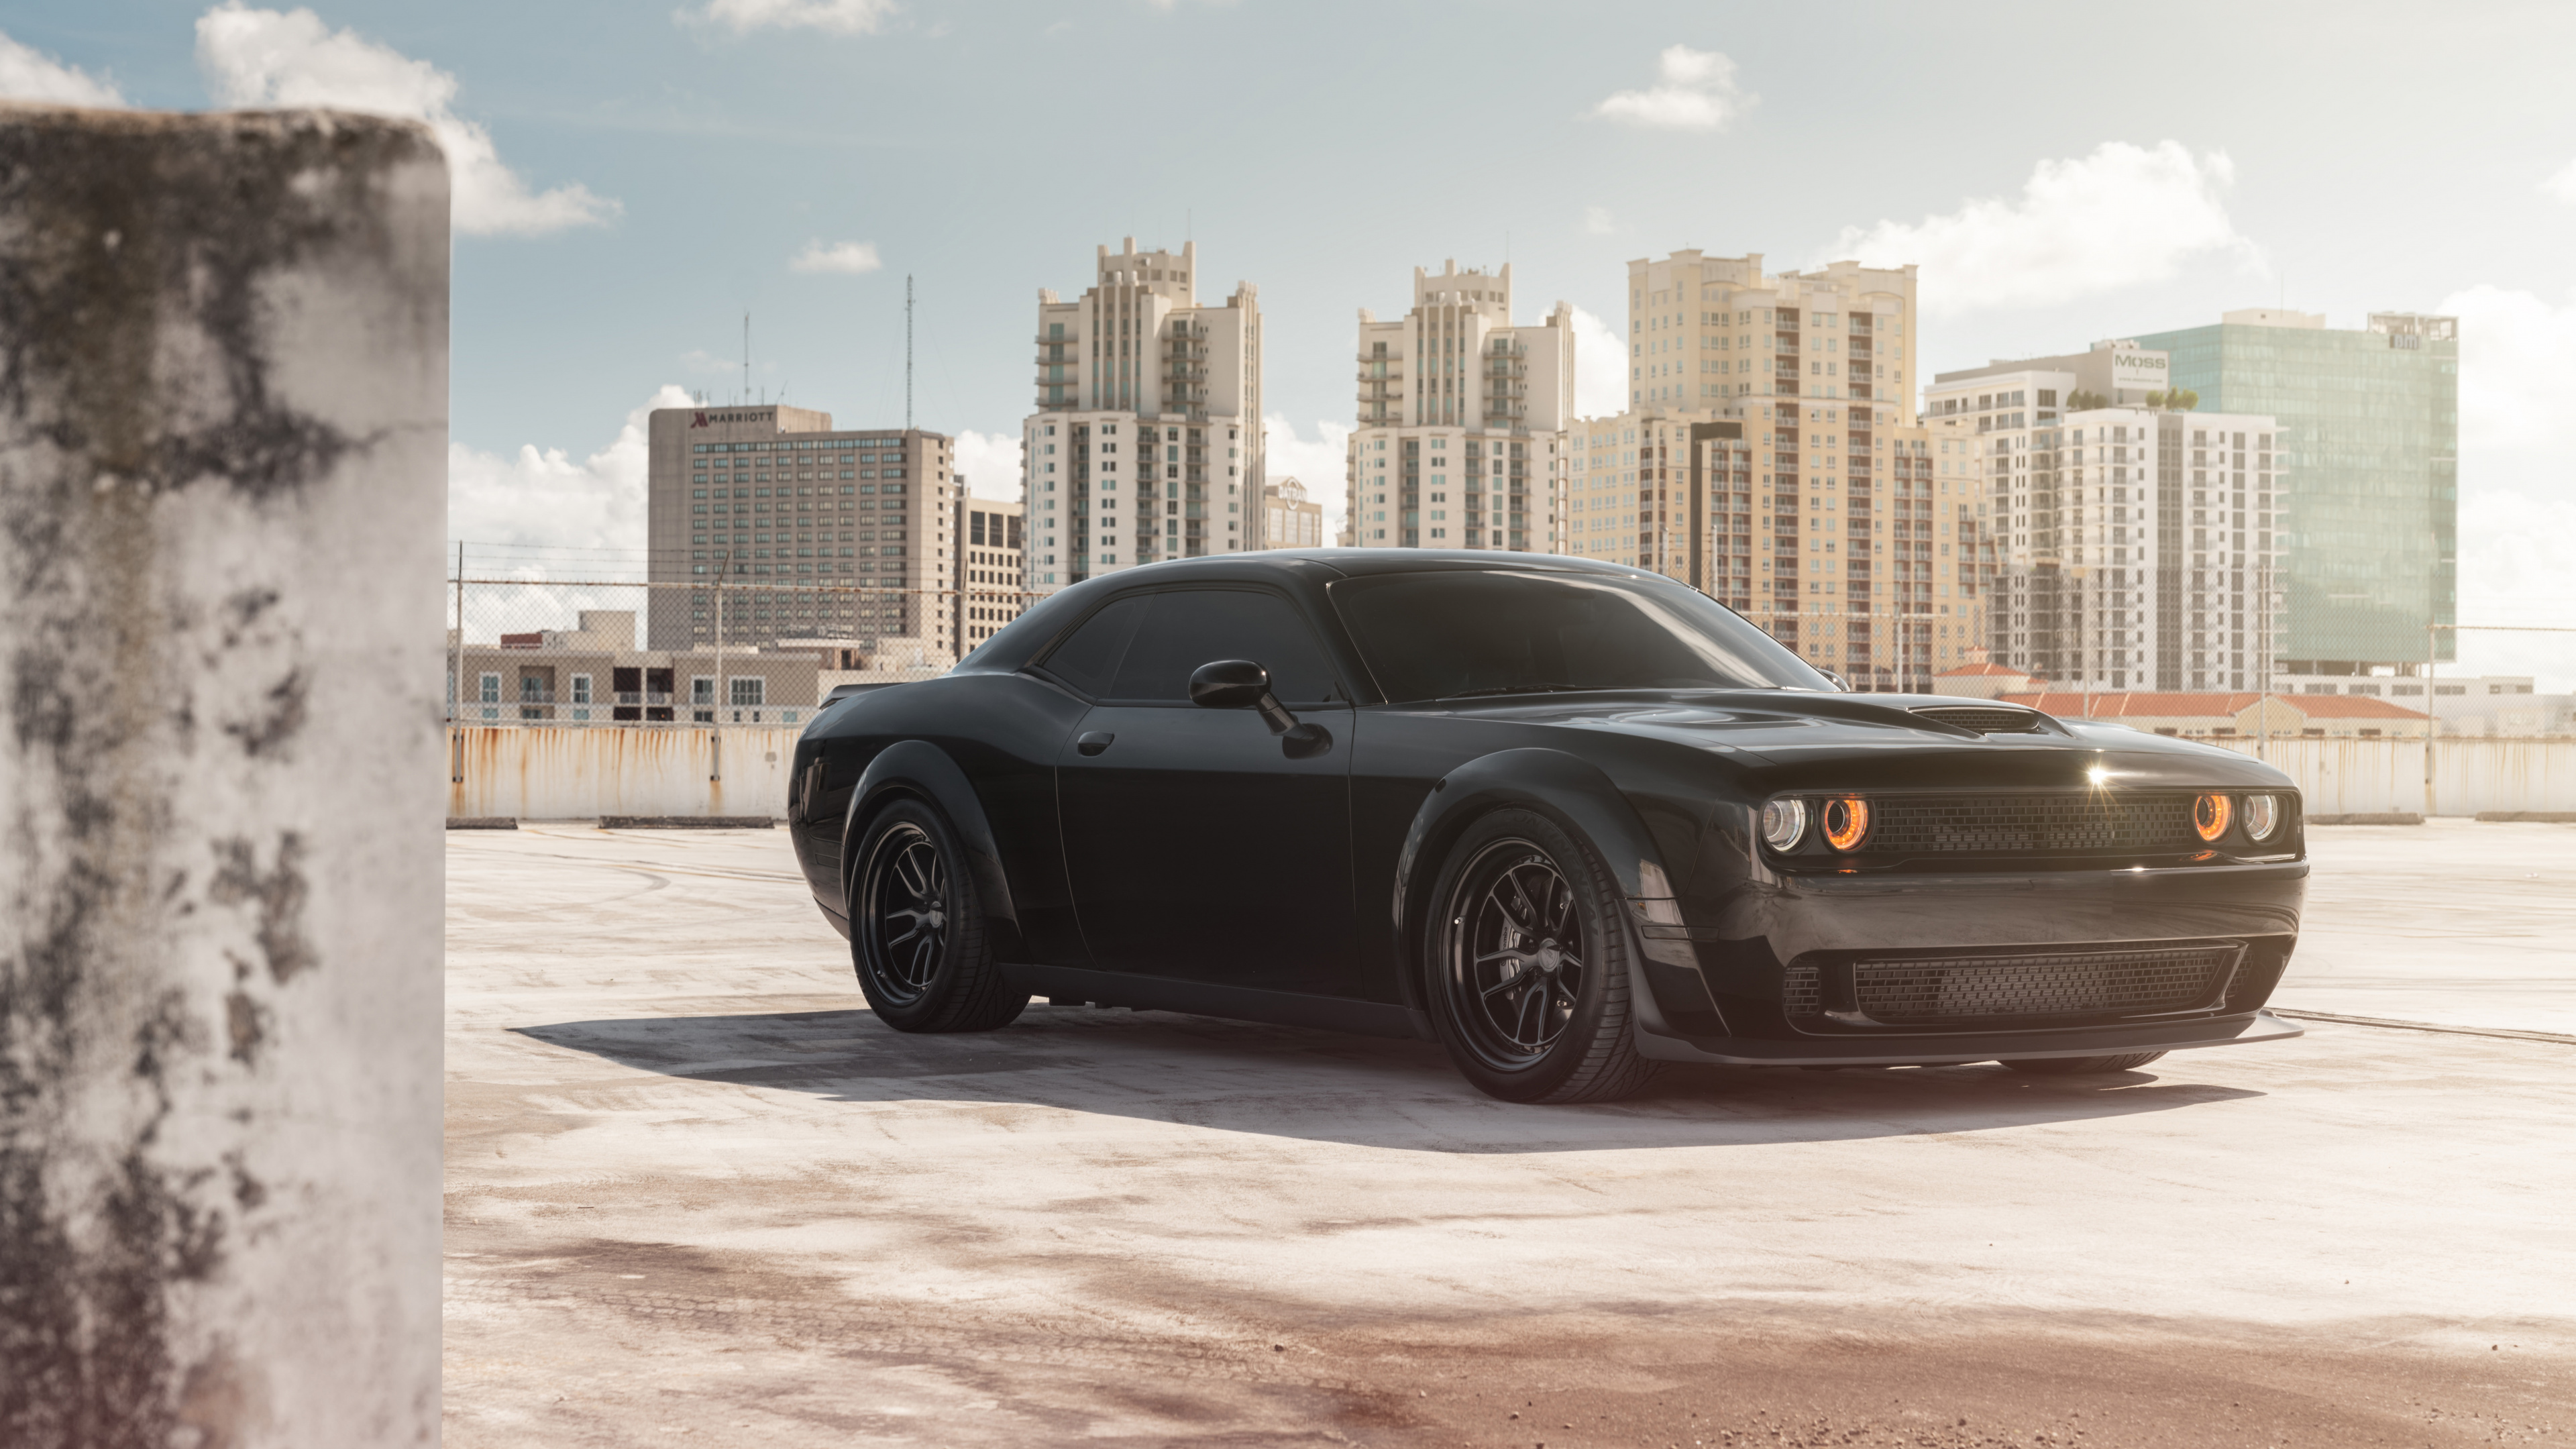 Black Coupe Parked on Gray Concrete Pavement During Daytime. Wallpaper in 3840x2160 Resolution